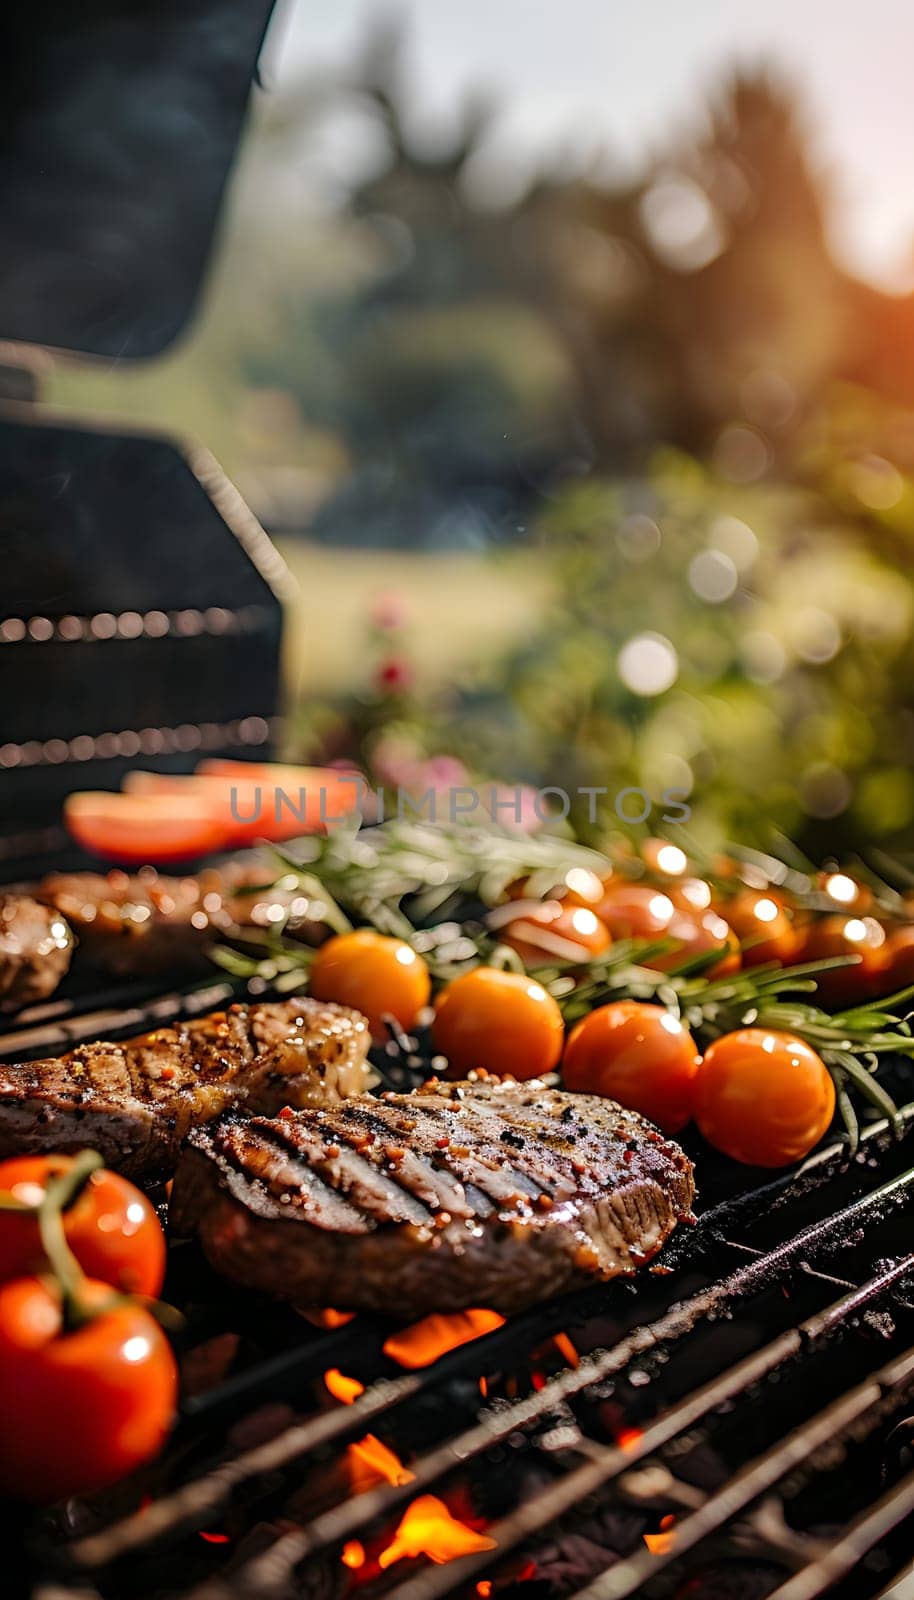 Ingredients for churrasco food like hamburgers and tomatoes are sizzling on an outdoor grill rack. Enjoy this cuisine with orange and natural foods on tableware